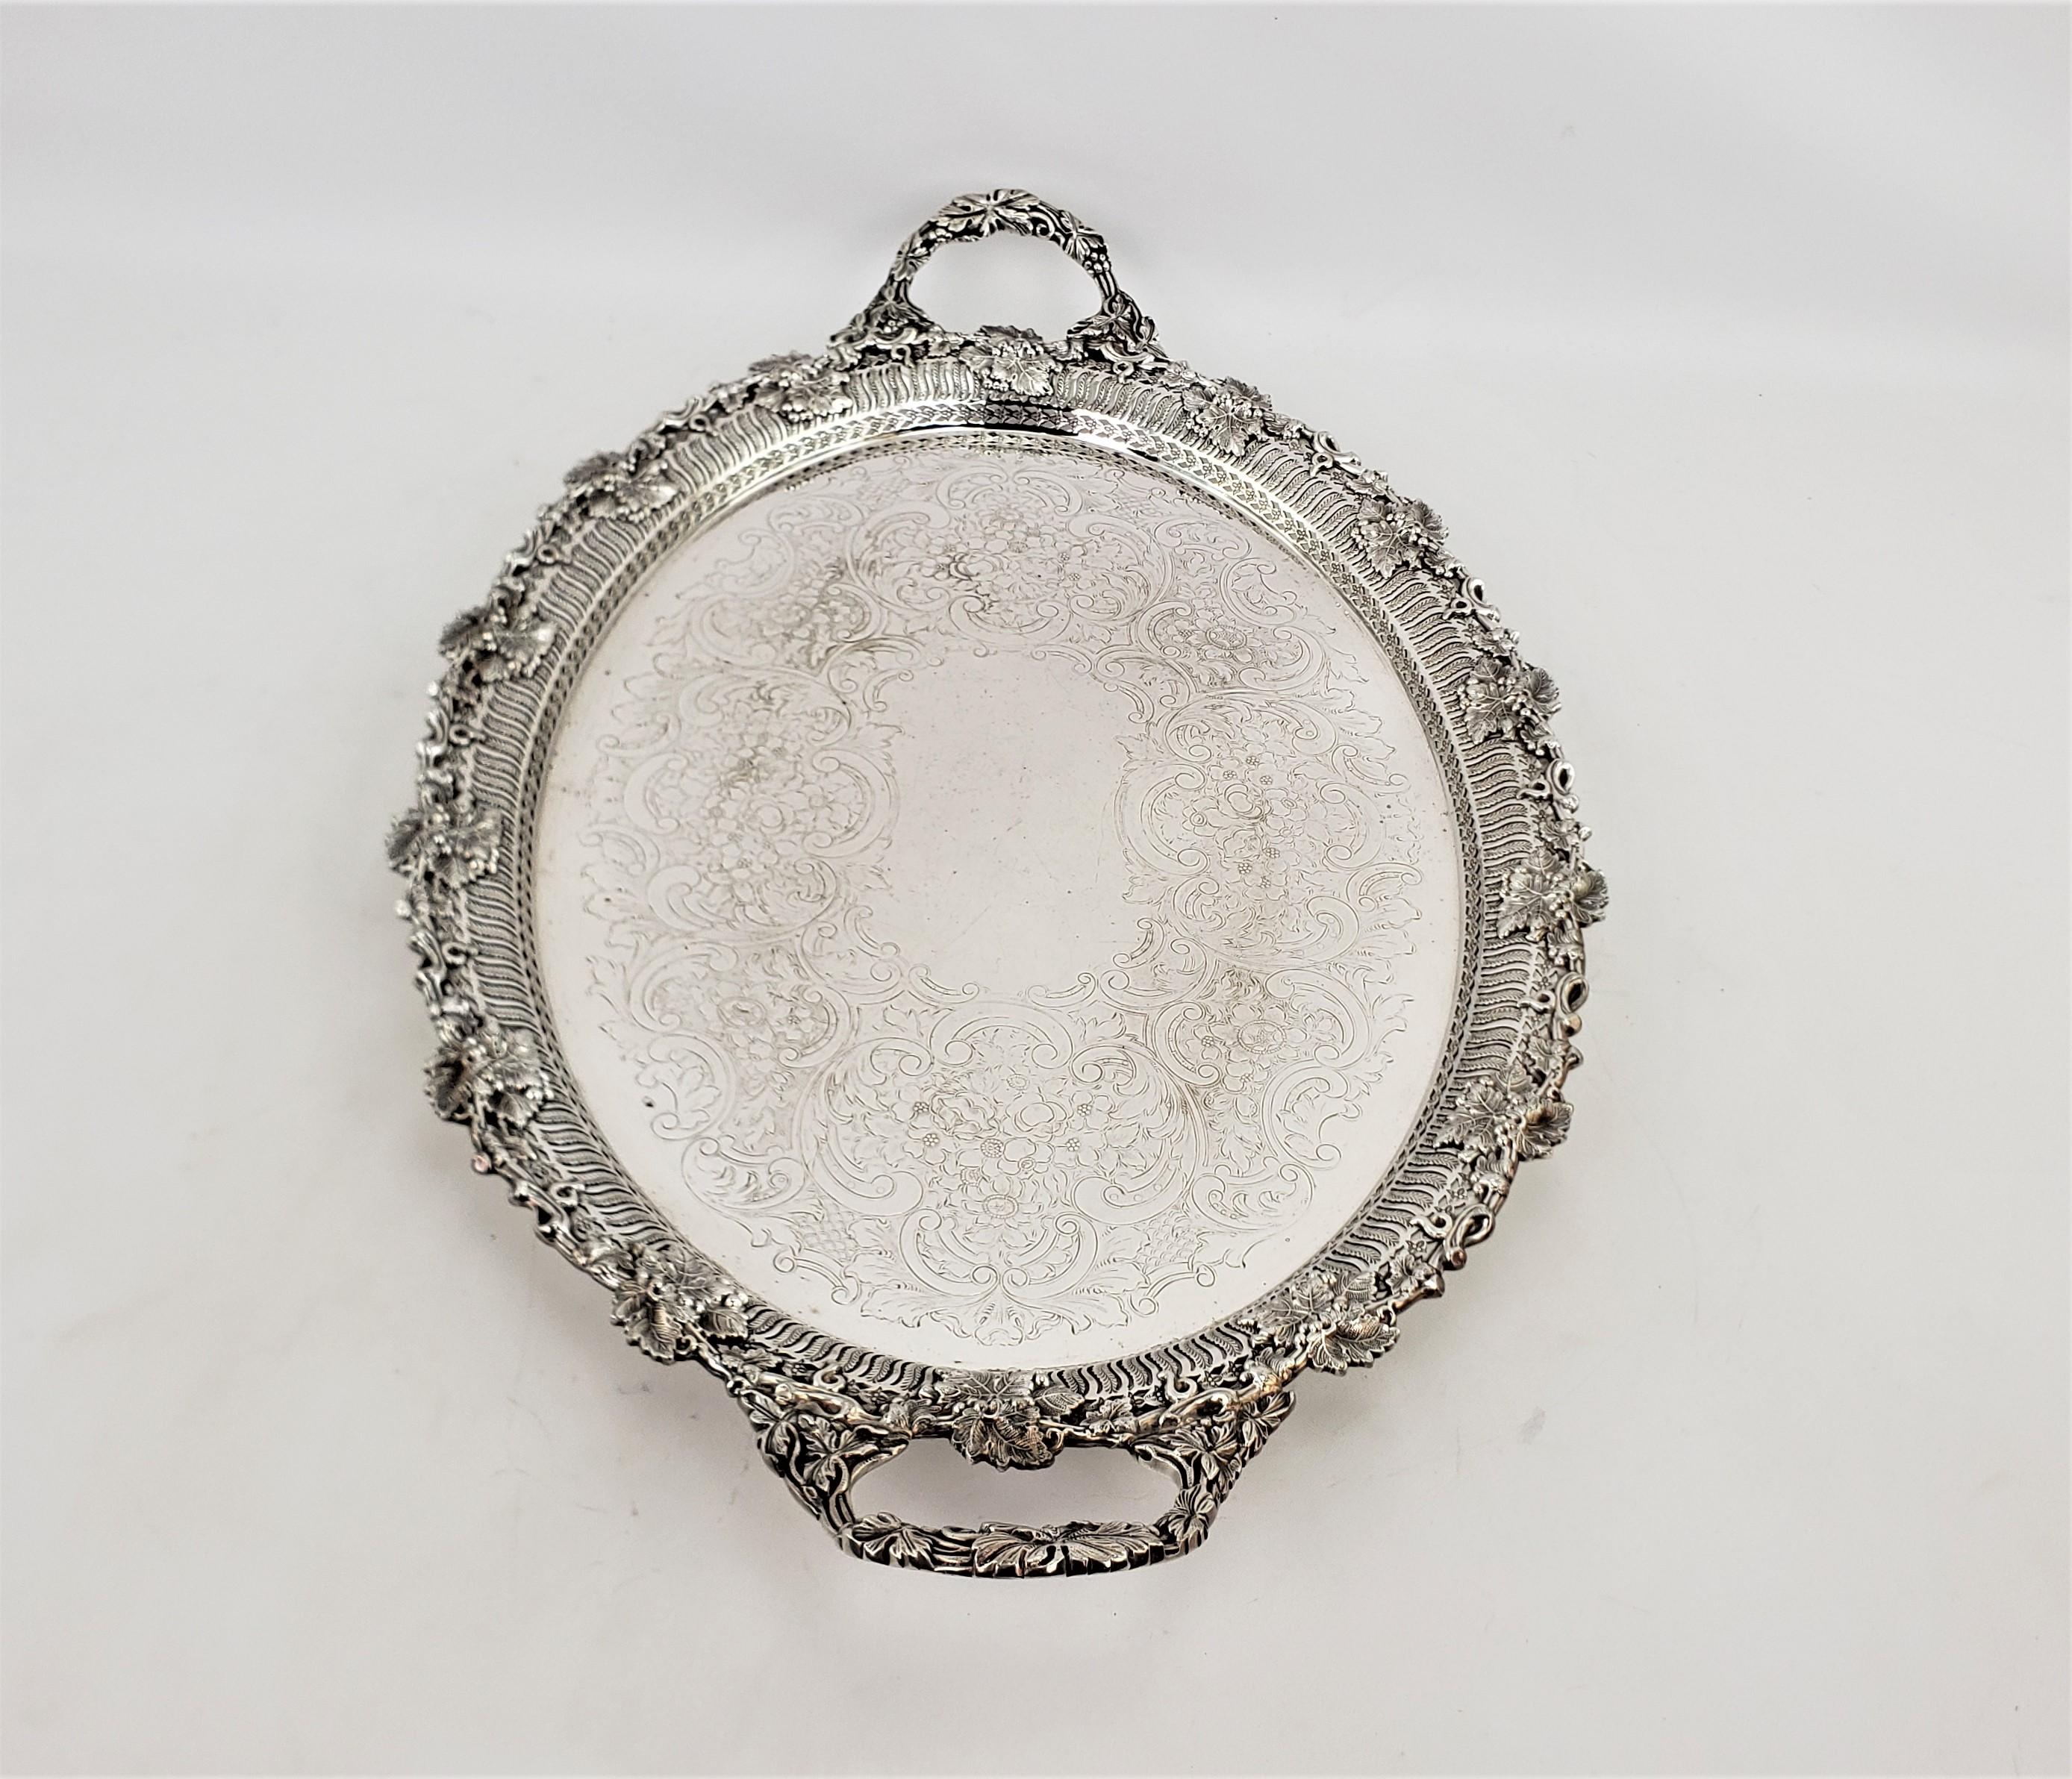 Antique Barker-Ellis Ornate Oval Silver Plated Serving Tray with Oak Leaves In Good Condition For Sale In Hamilton, Ontario